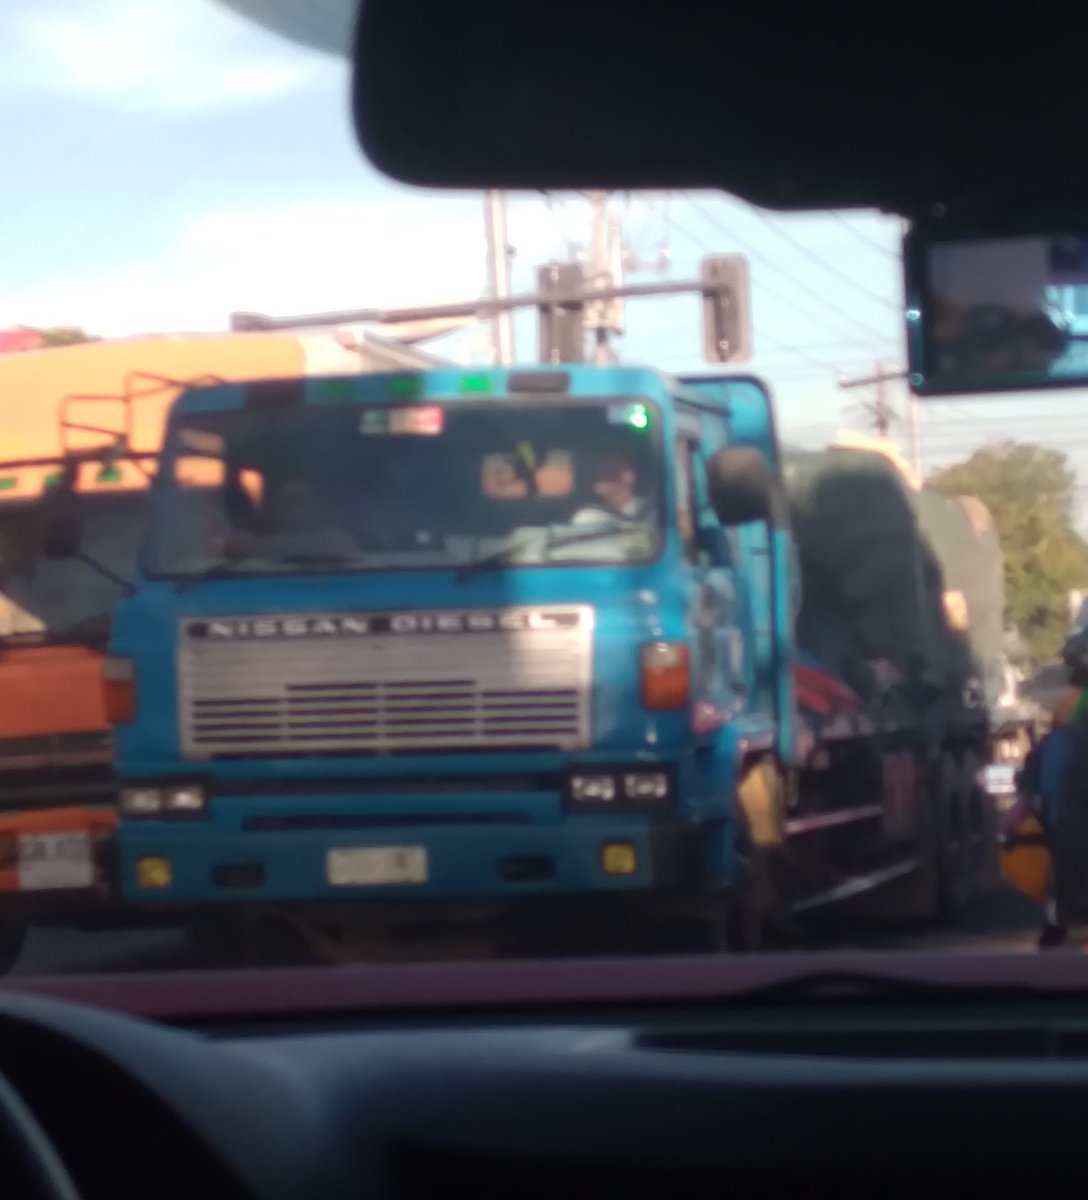 The same Blue Nissan Diesel Resona CD spotted once again, this time carrying construction materials for a construction project.